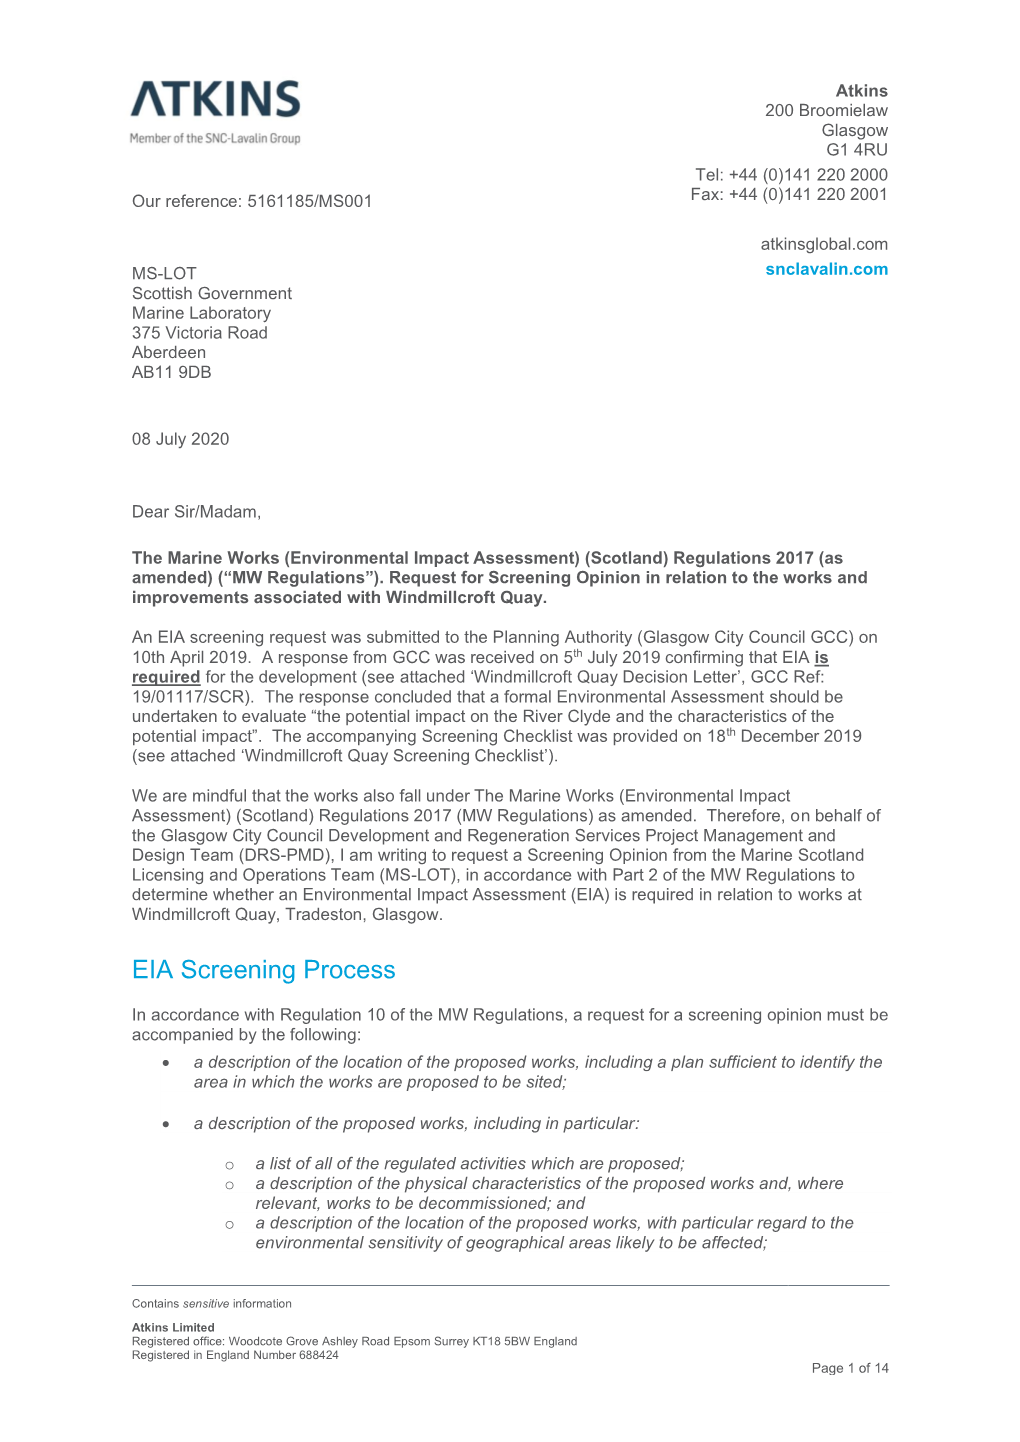 Screening Request Was Submitted to the Planning Authority (Glasgow City Council GCC) on 10Th April 2019